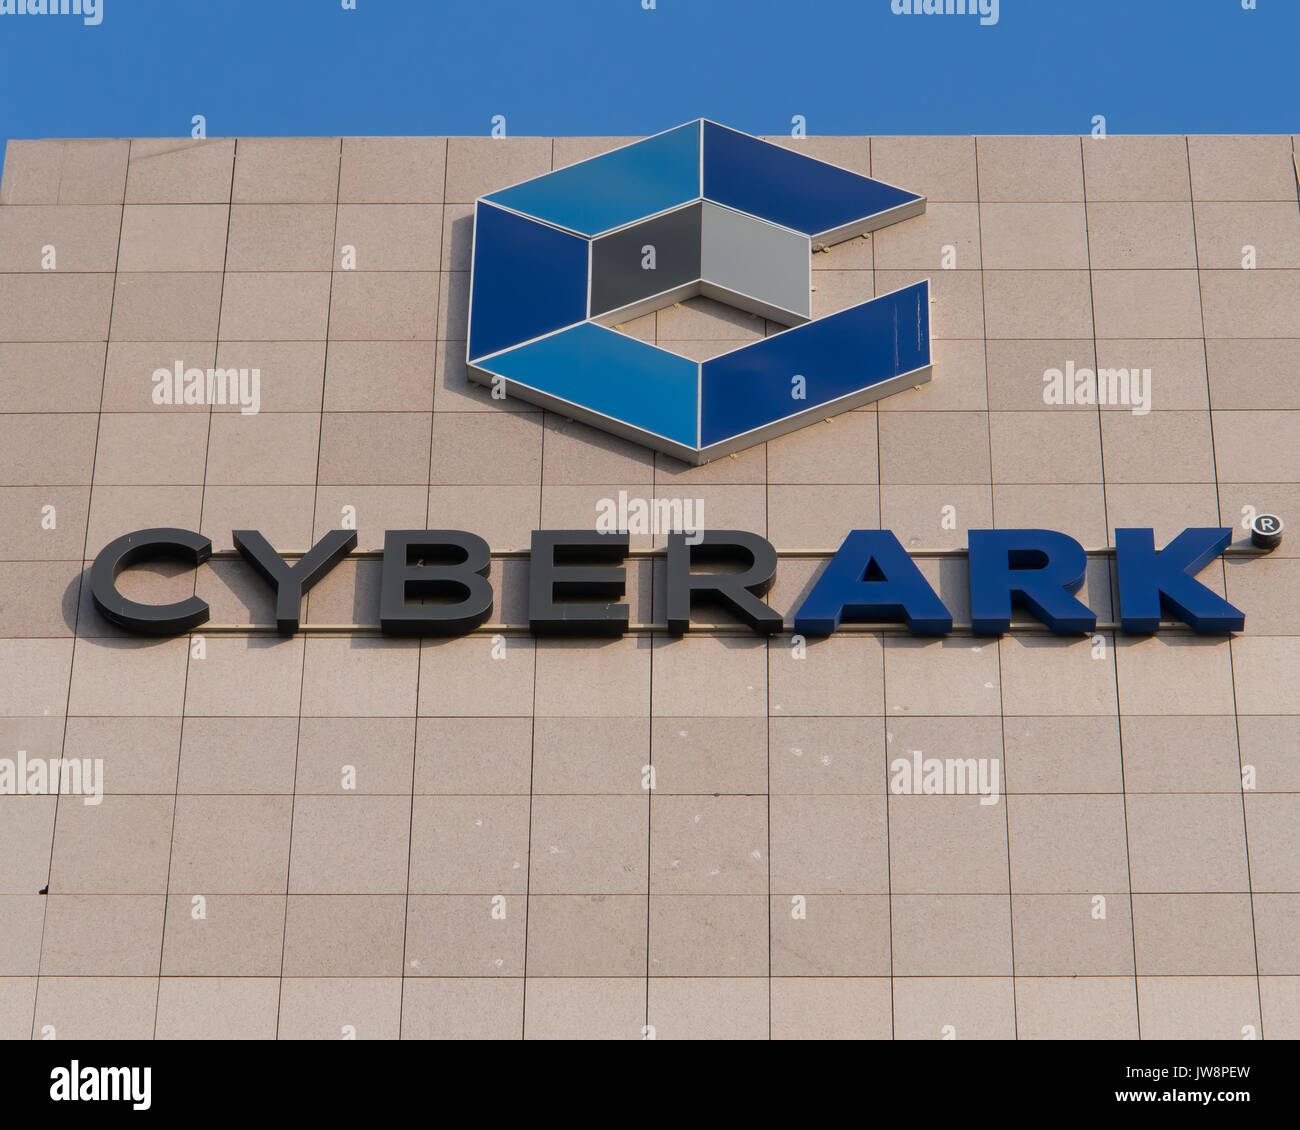 Petach Tikva, Israel. August 11, 2017. Cyberark corporate offices in Israel. Cyberark makes security software solutions. Stock Photo